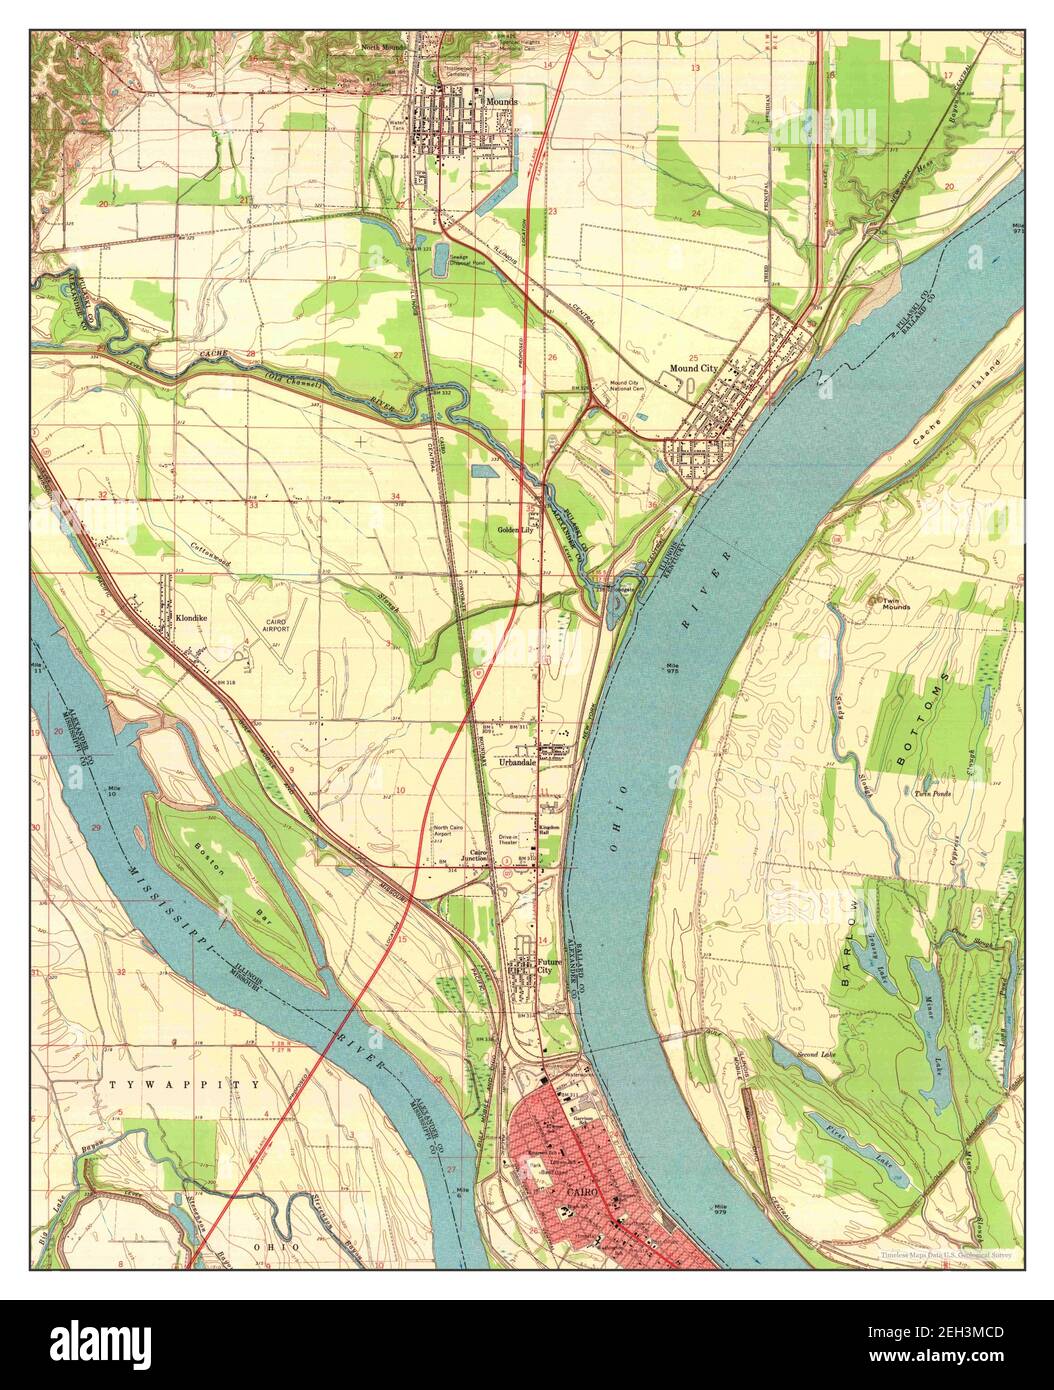 Cairo Illinois Map 1967 124000 United States Of America By Timeless Maps Data Us Geological Survey 2EH3MCD 